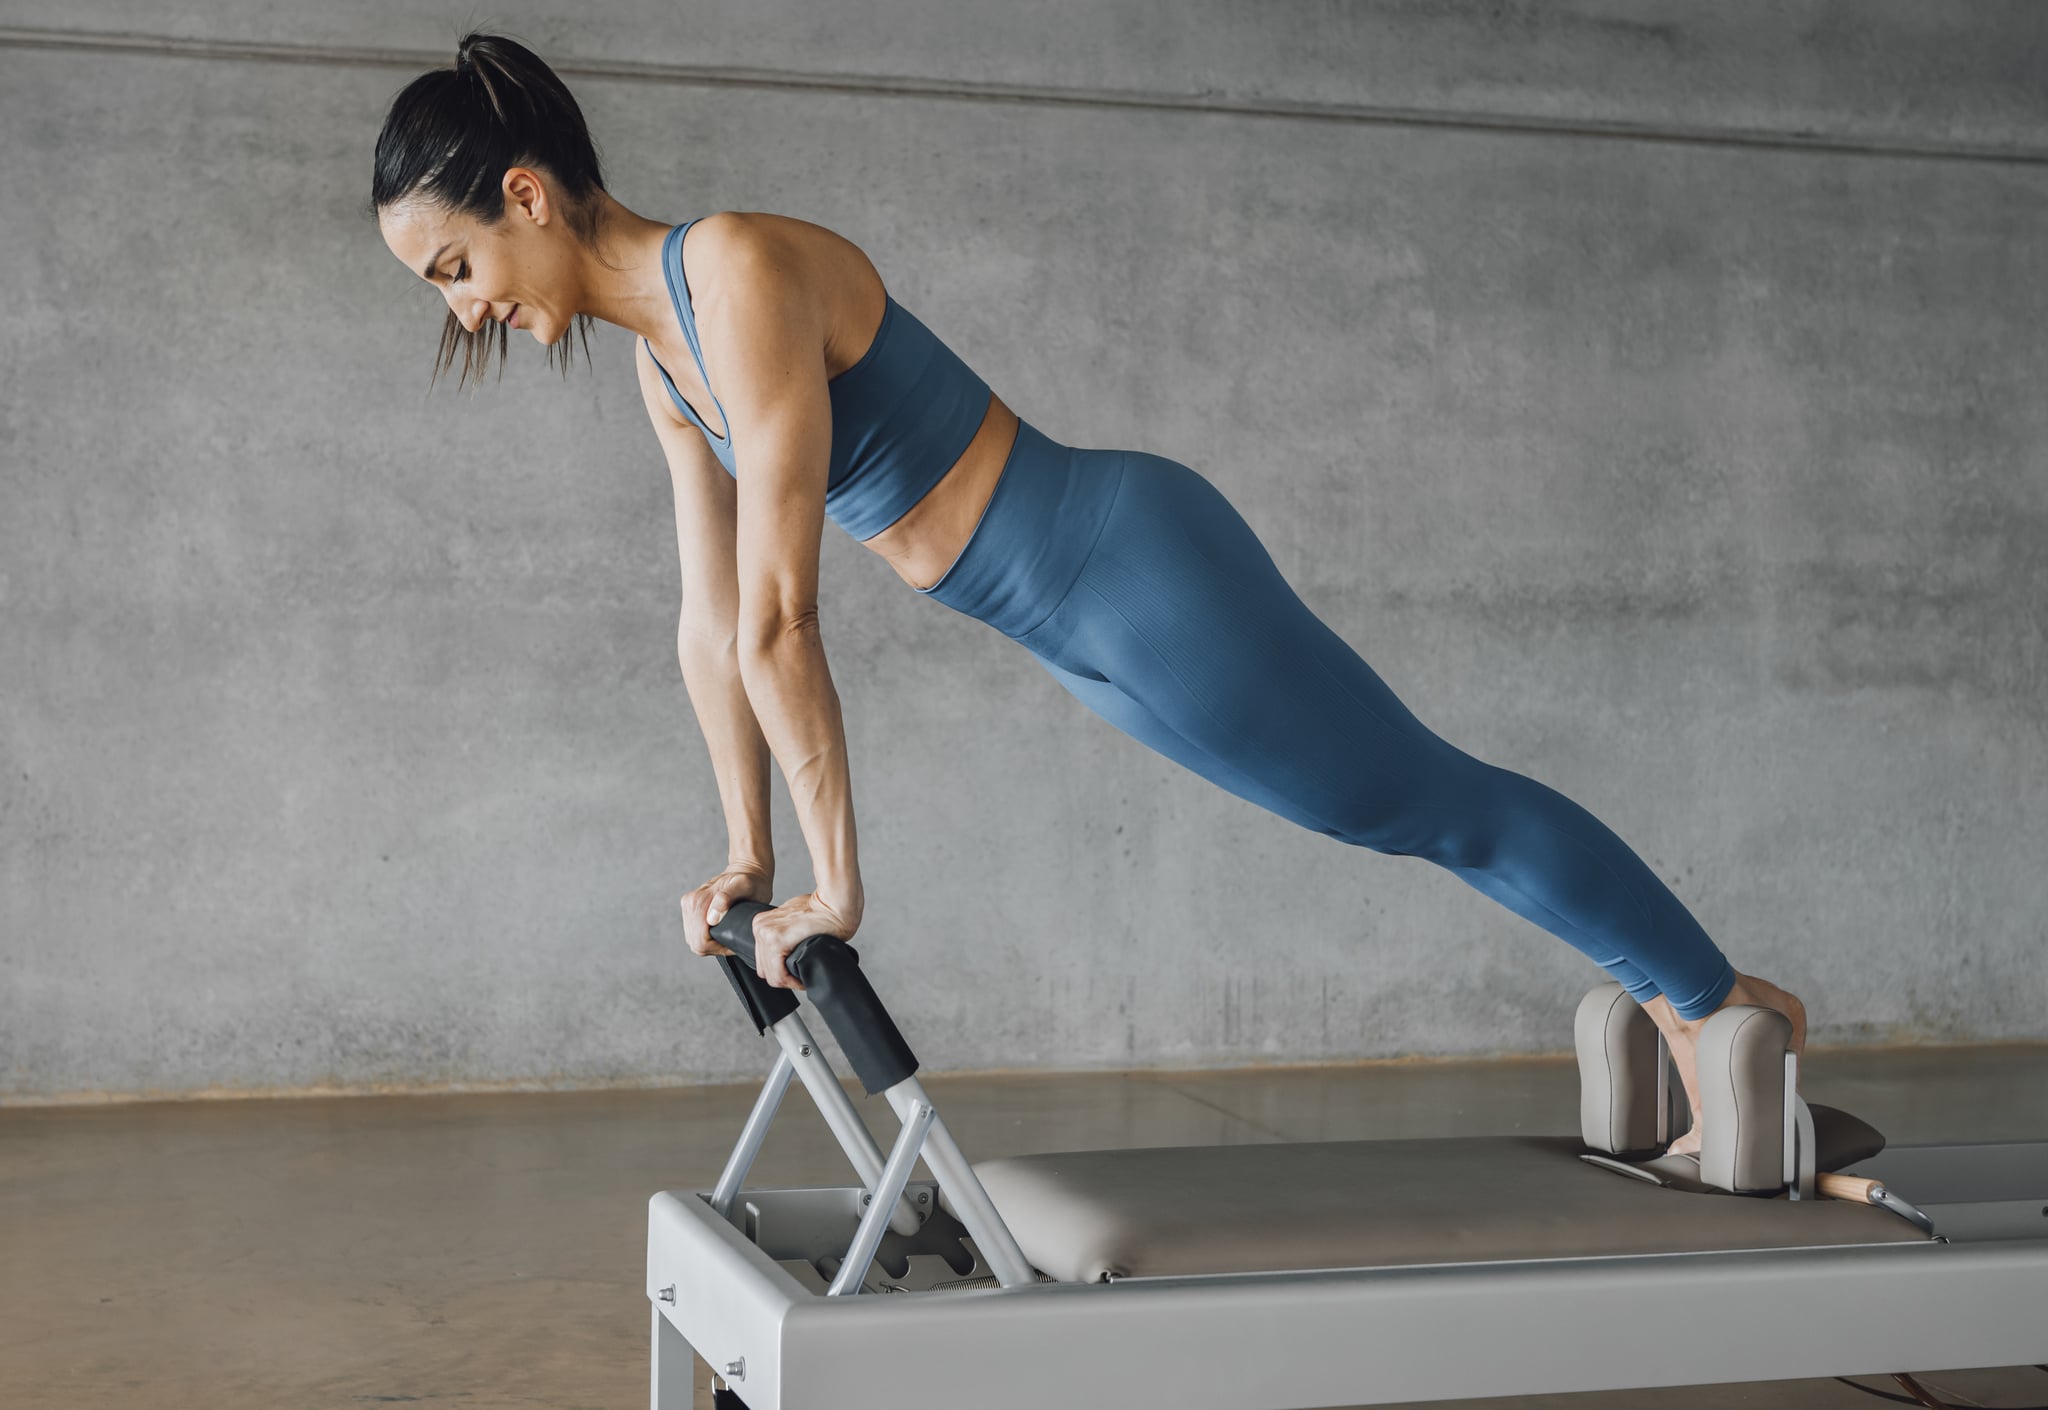 Woman performing a Pilates burpee on a reformer apparatus